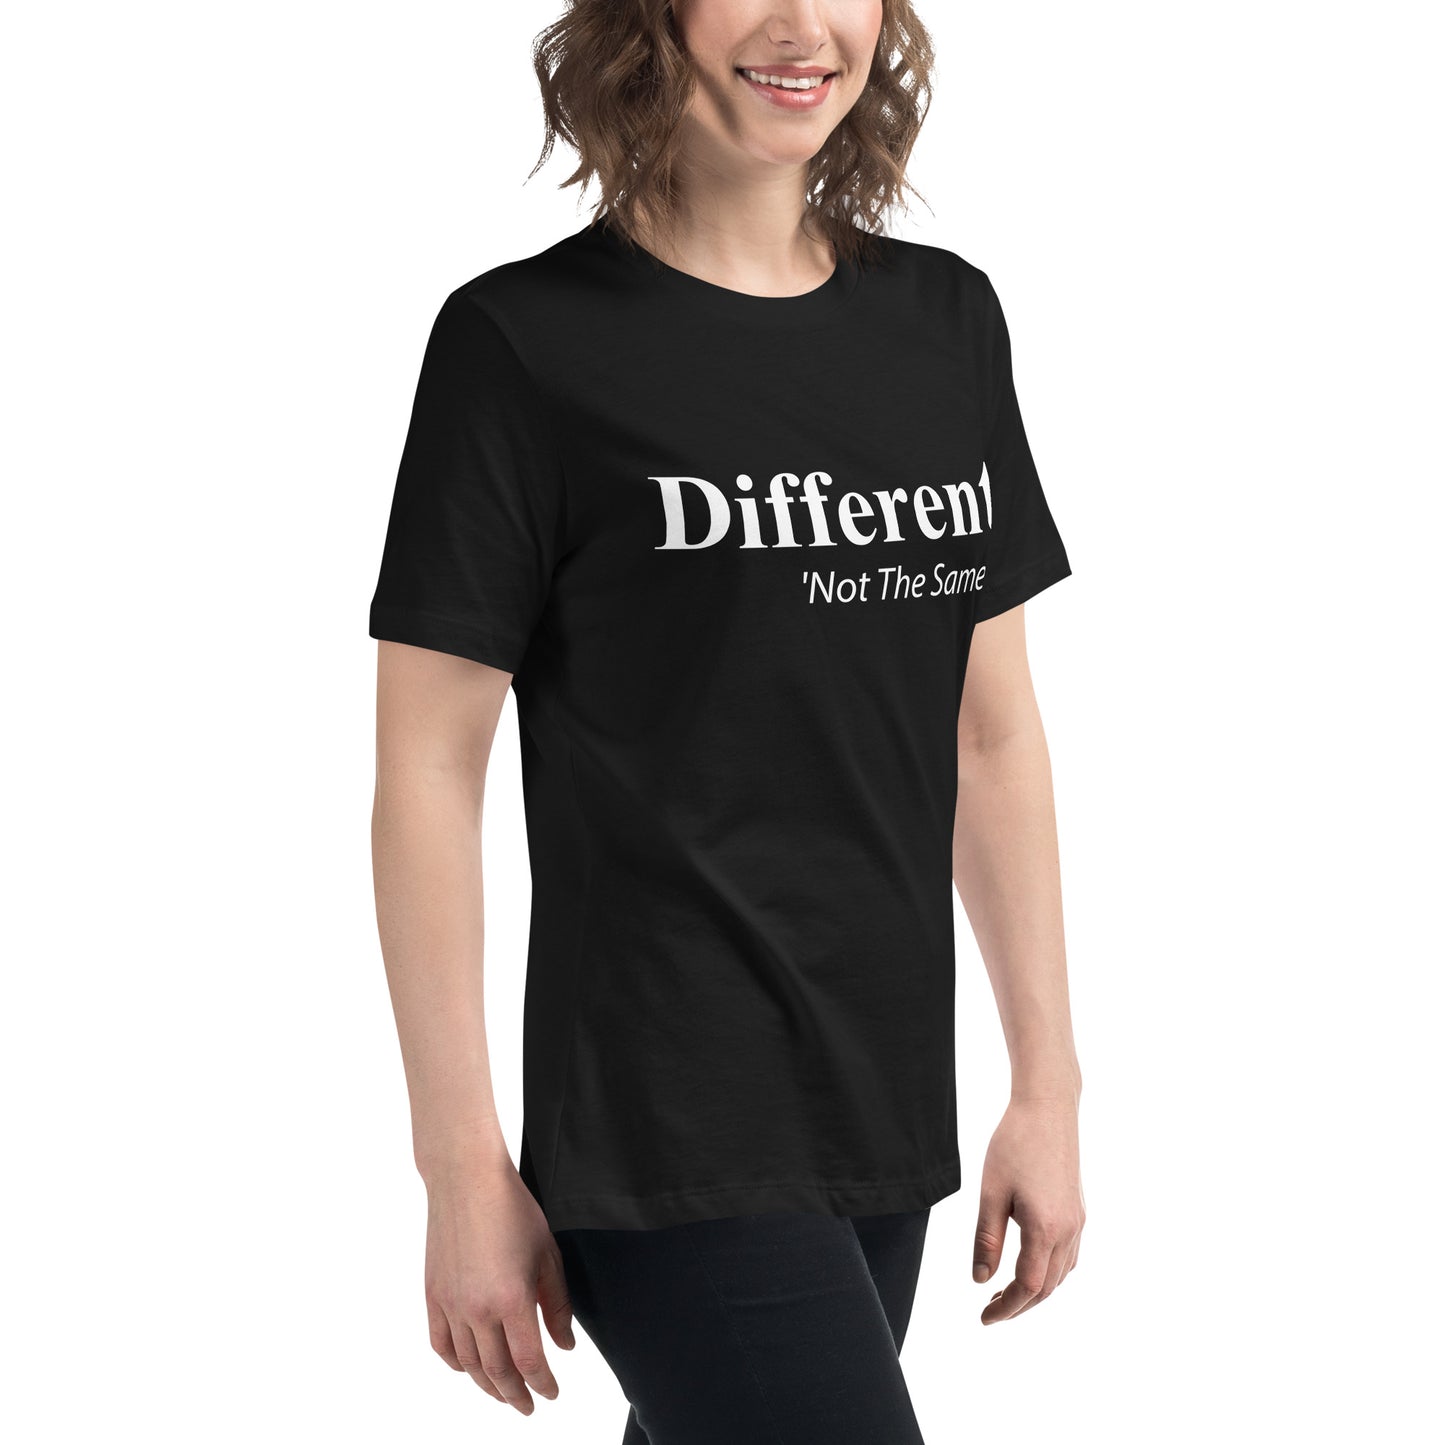 Different not the same  Women's Relaxed T-Shirt - Trendy and Cozy Women's Tee